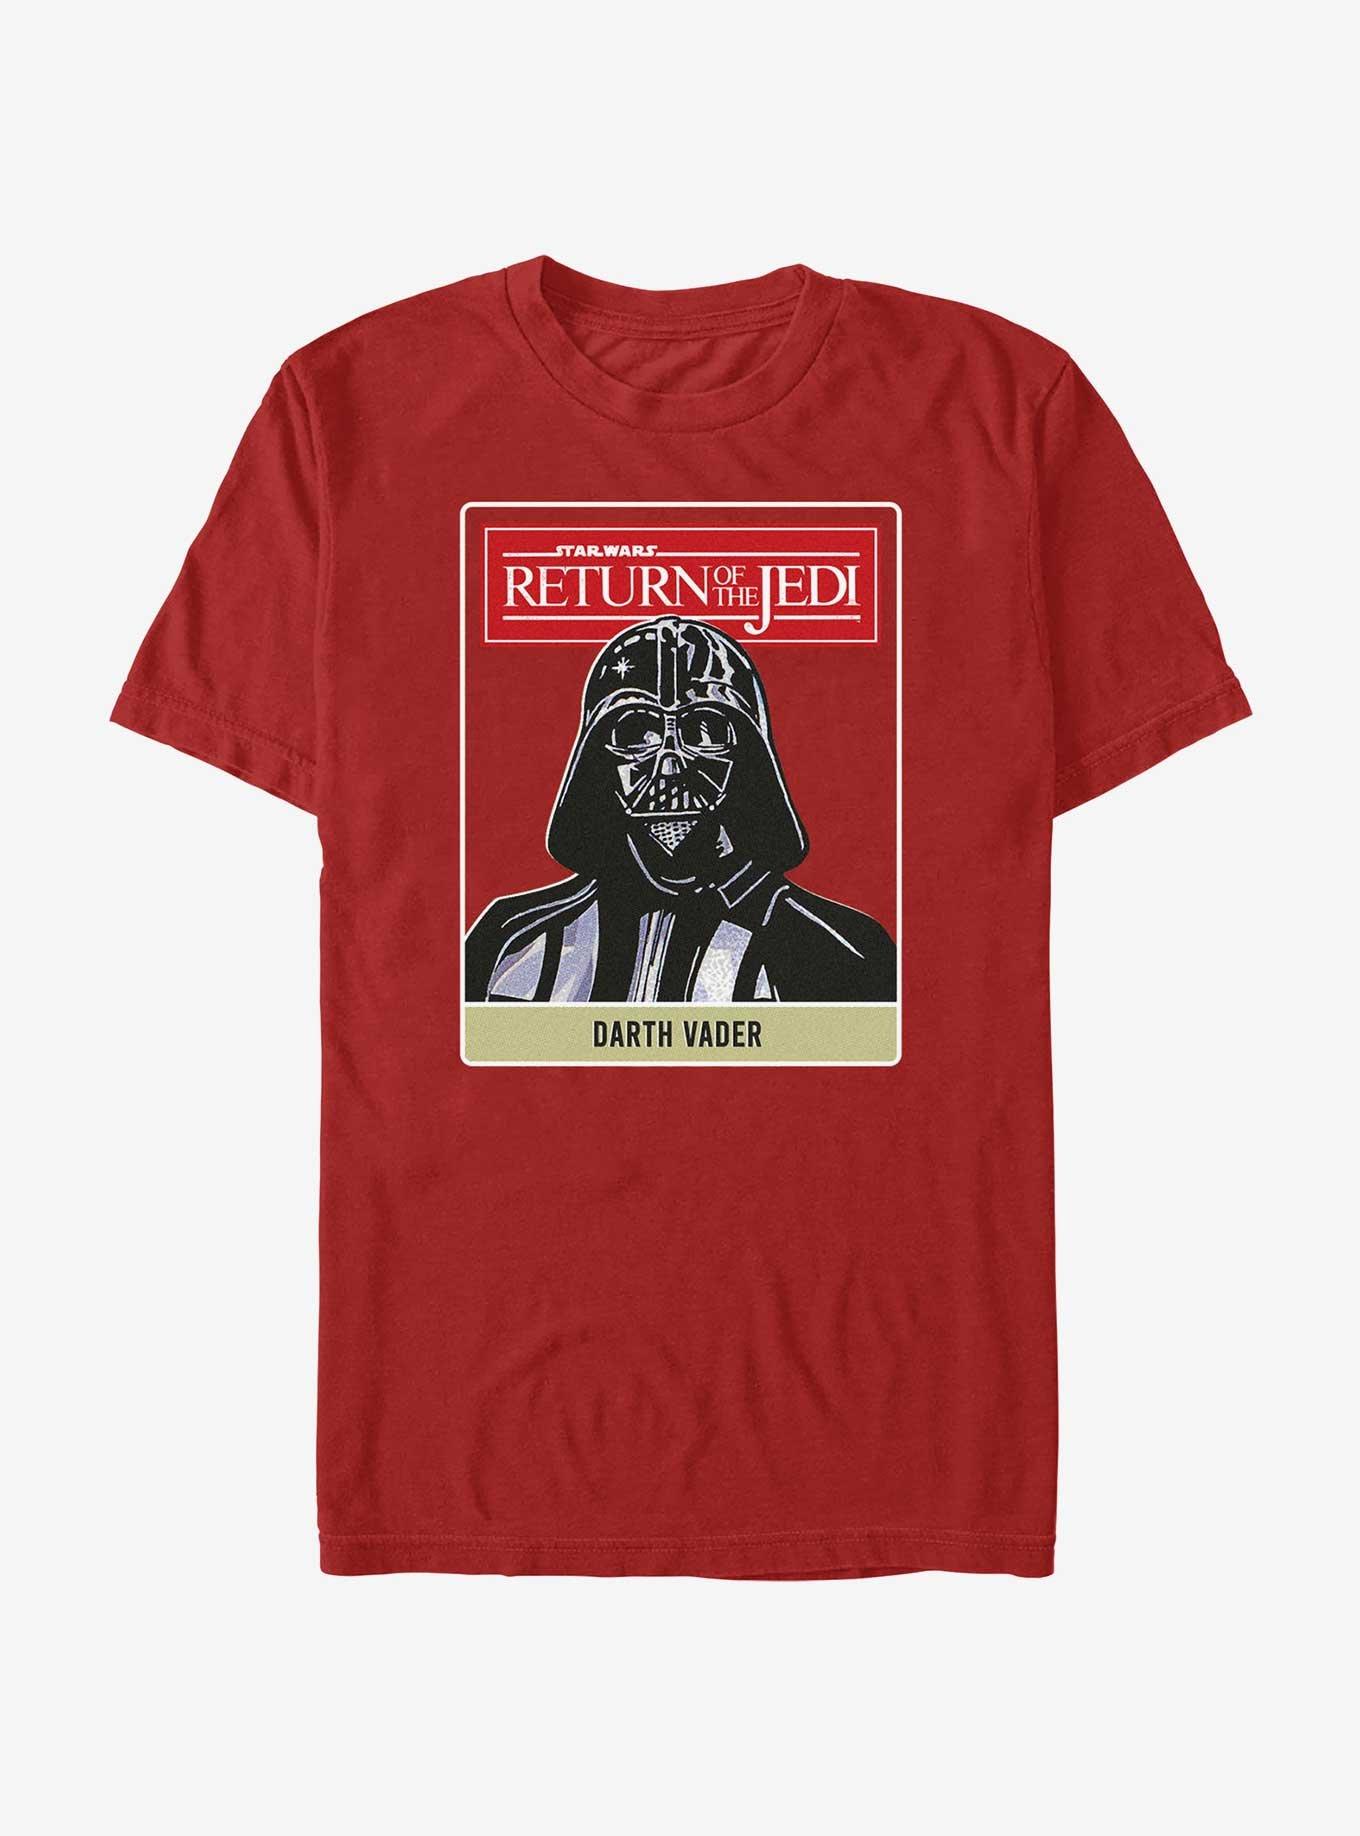 Star Wars Return of the Jedi 40th Anniversary Darth Vader Poster T-Shirt, RED, hi-res